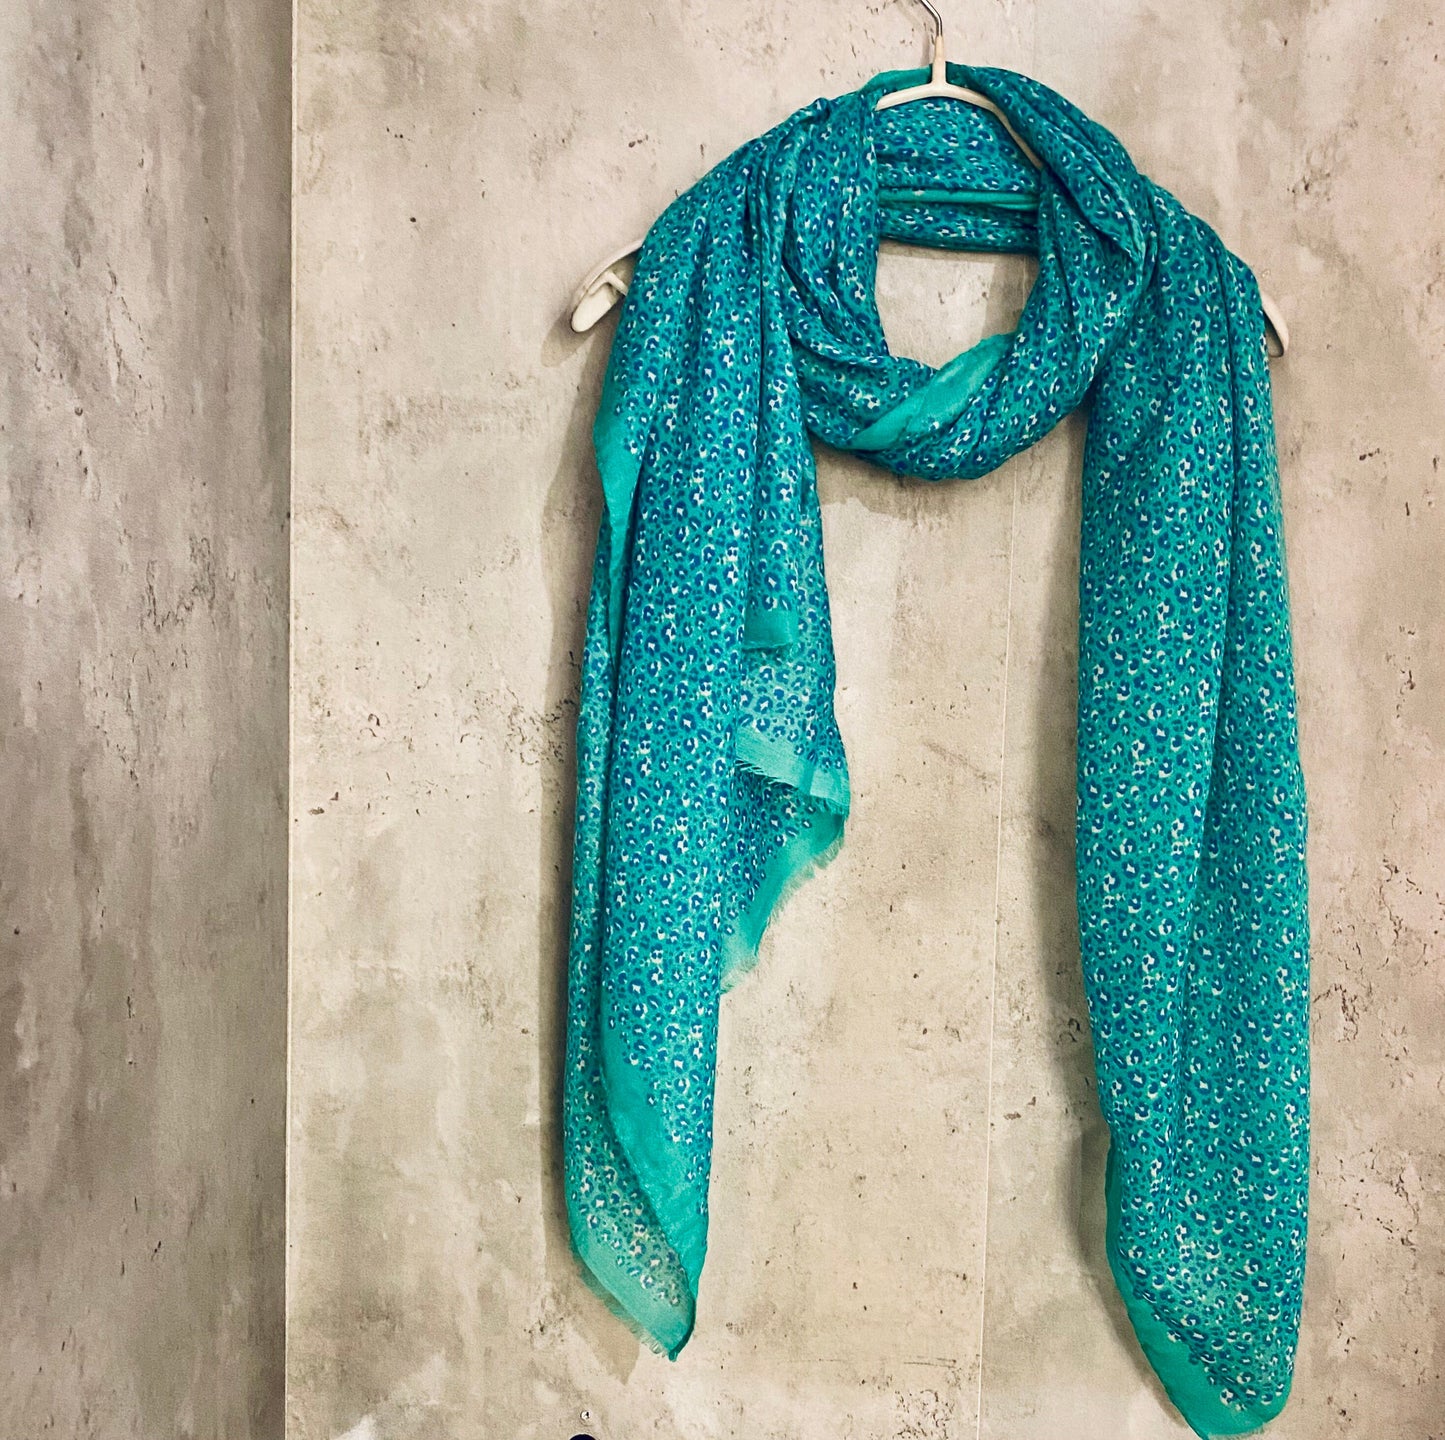 Small leopard Turquoise Blue Cotton Scarf/Spring Summer Autumn Scarf/UK Seller/Scarf Women/Gifts For Mom/Gifts For Her Birthday/Christmas